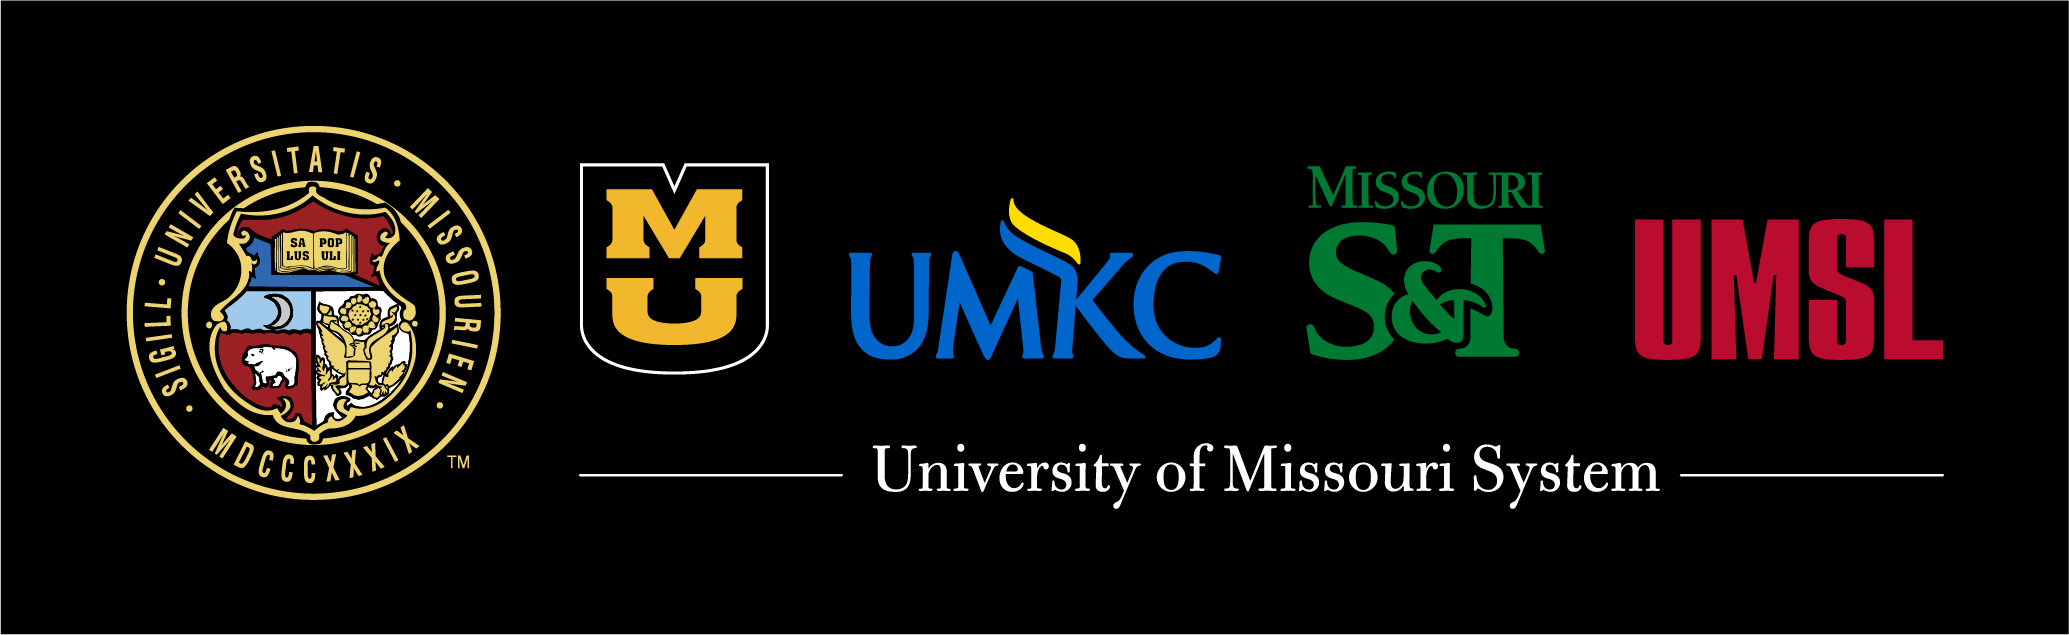 Horizontal UM System logo lockup with the UM Seal to the left of all four campus logos: University of Missouri-Columbia, University of Missouri-Kansas City, Missouri Science and Technology, University of Missouri-St. Louis on a black background